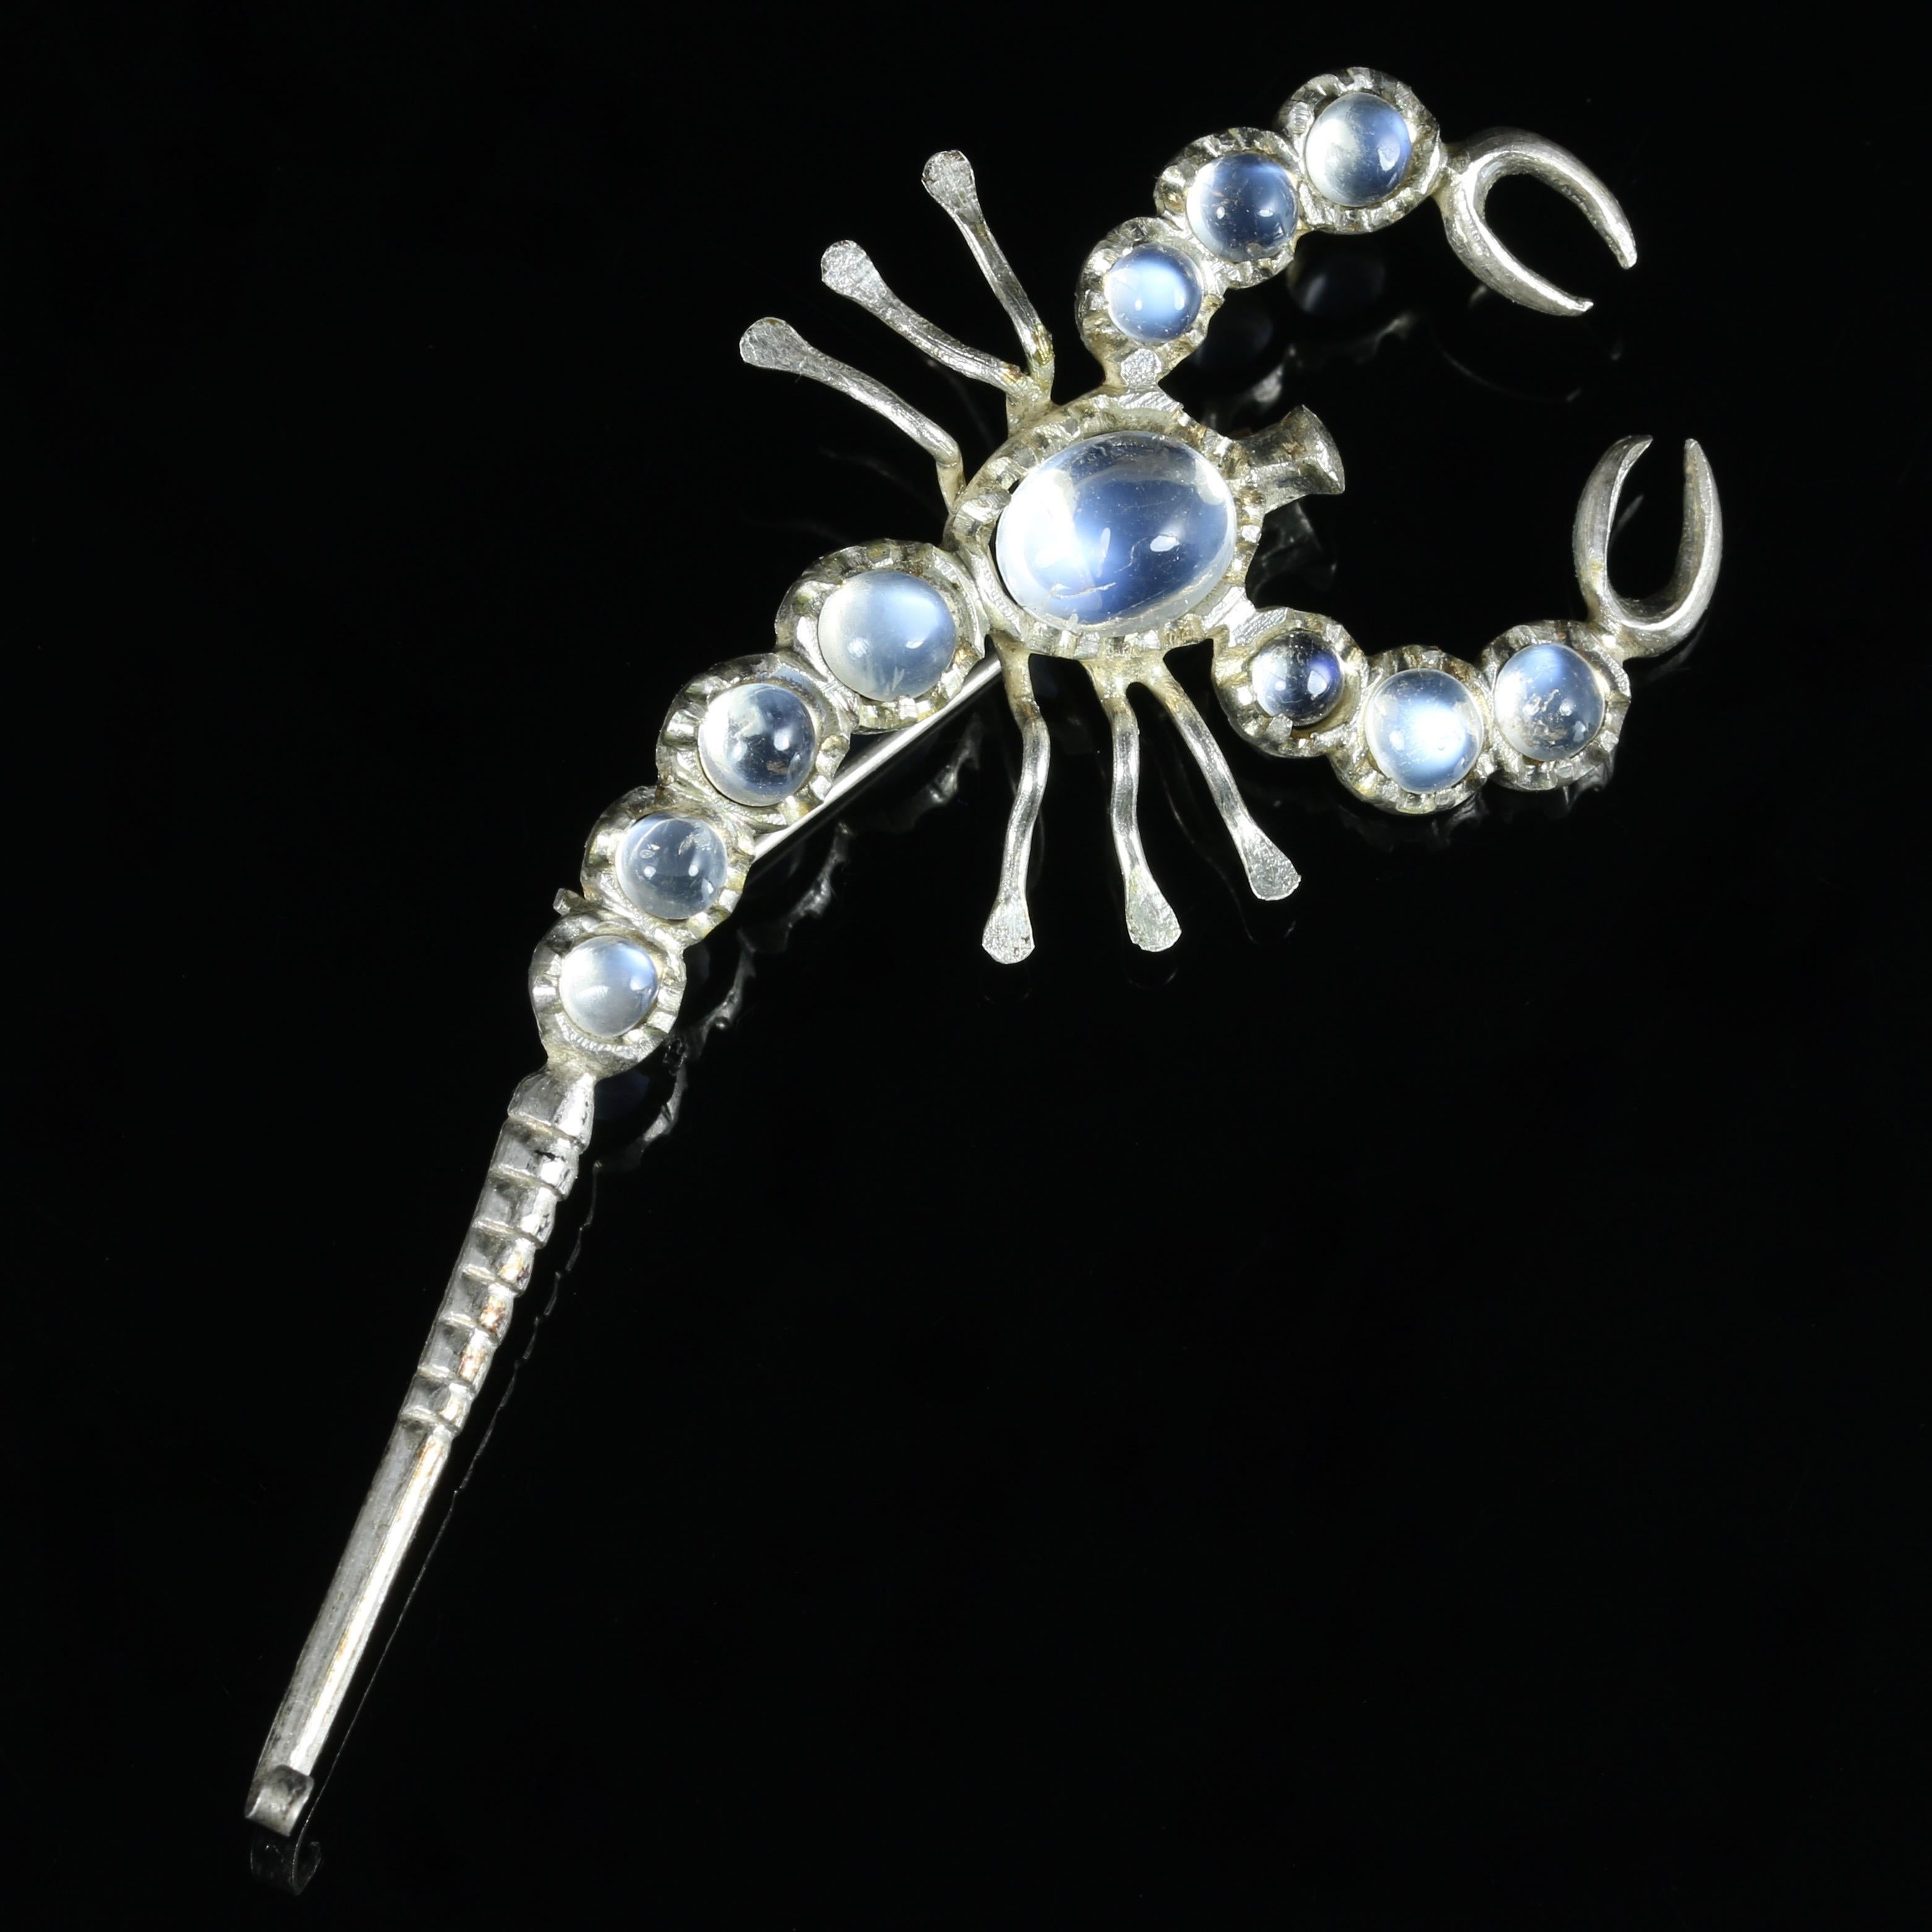 For more details please click continue reading down below...

This gorgeous antique Victorian Moonstone Scorpion brooch is set in Silver, all genuine Victorian, Circa 1880. 

The lovely Scorpion is adorned with 11 blue Moonstones set into its